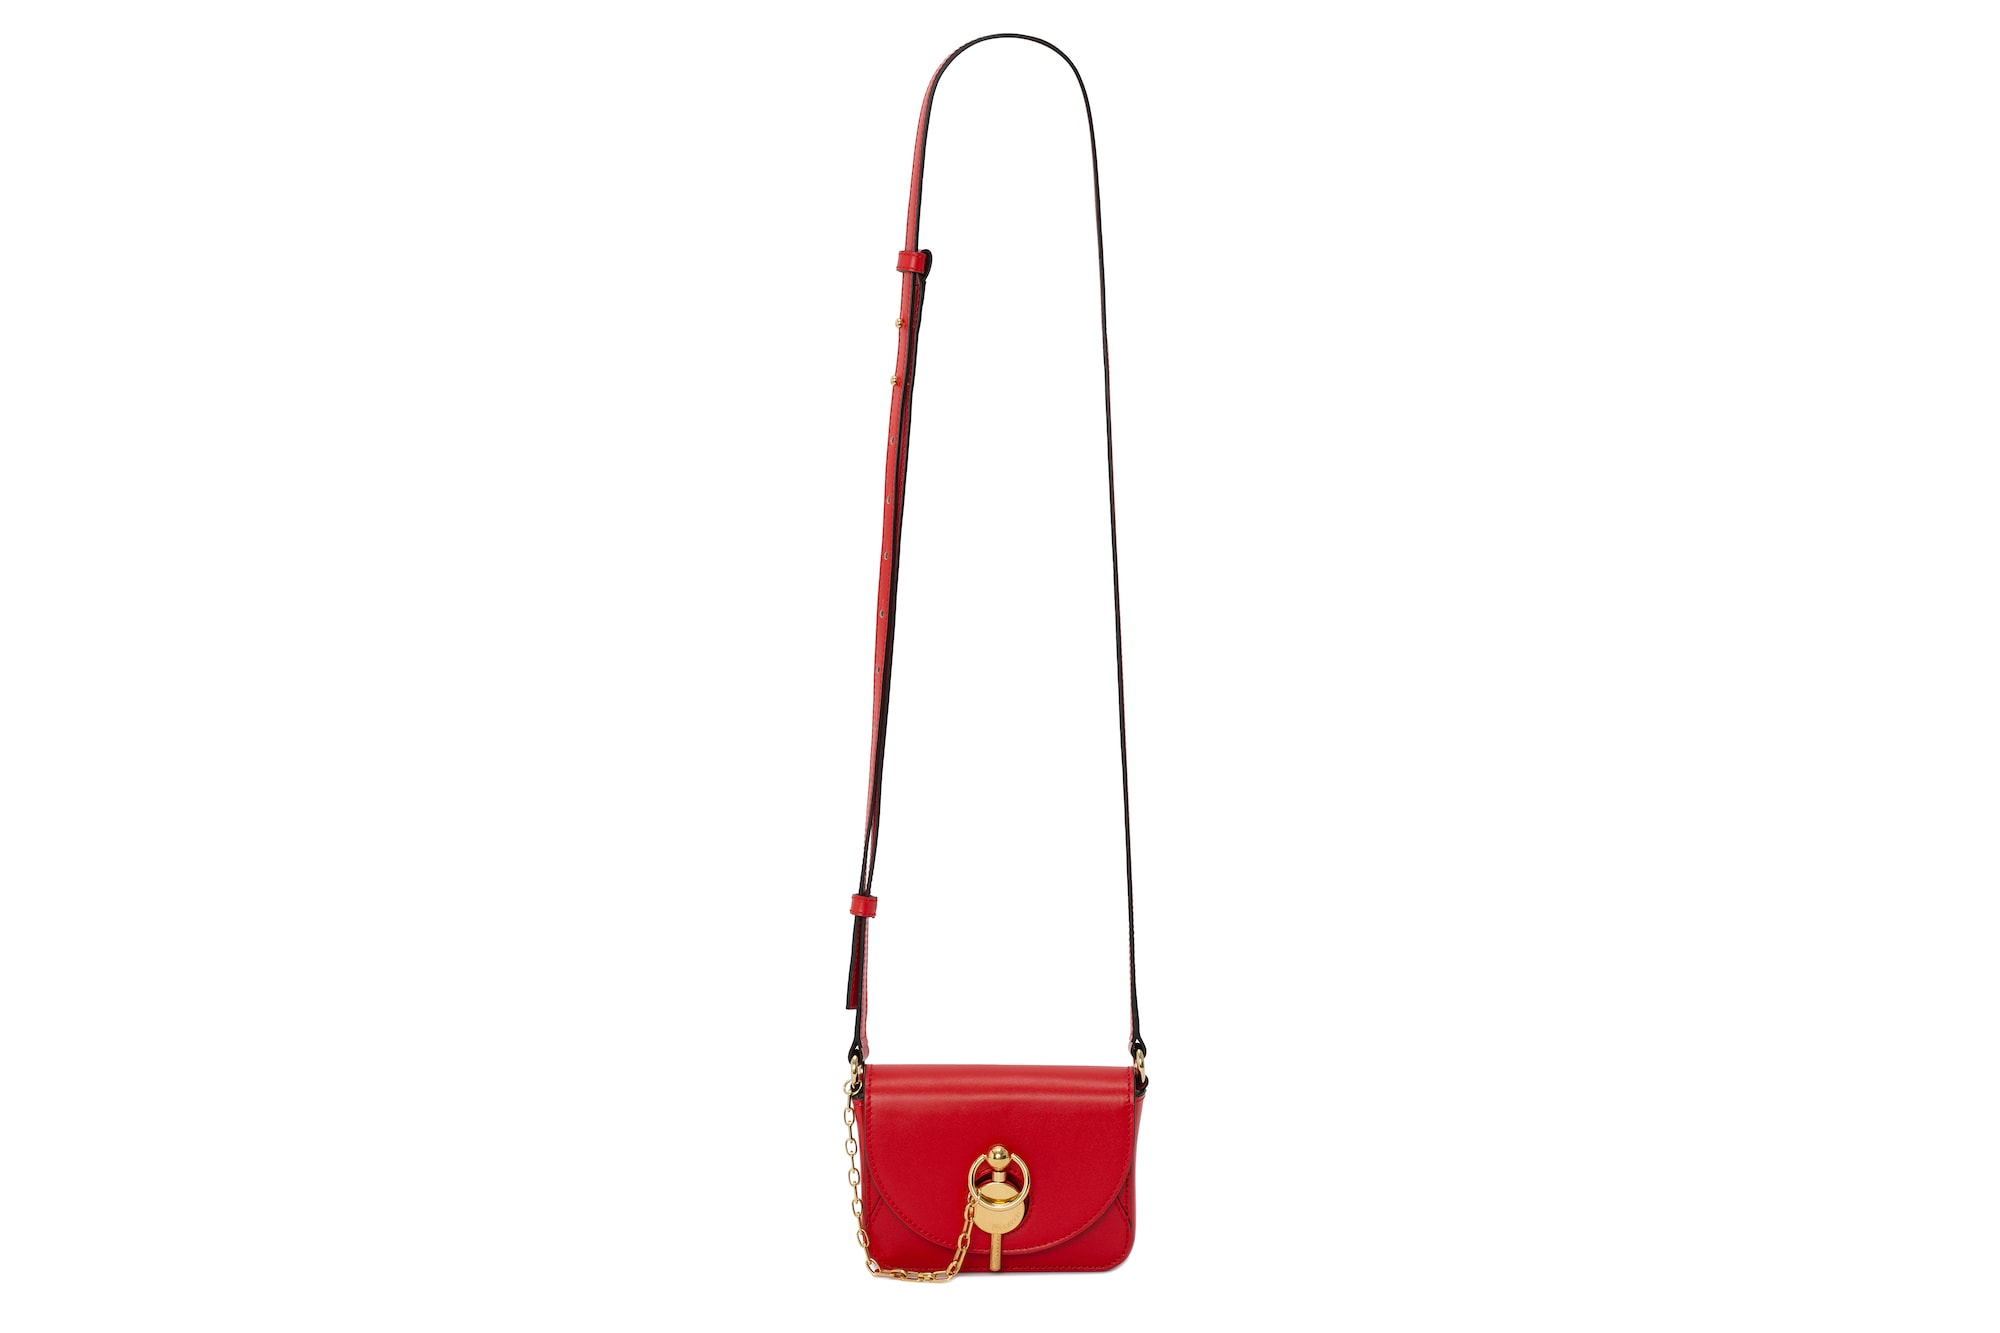 JW Anderson SS19 Spring Summer 2019 KEYTS Bag Release Color Leather Purse Gold Hardware Key Logo Red Yellow Black White Purple